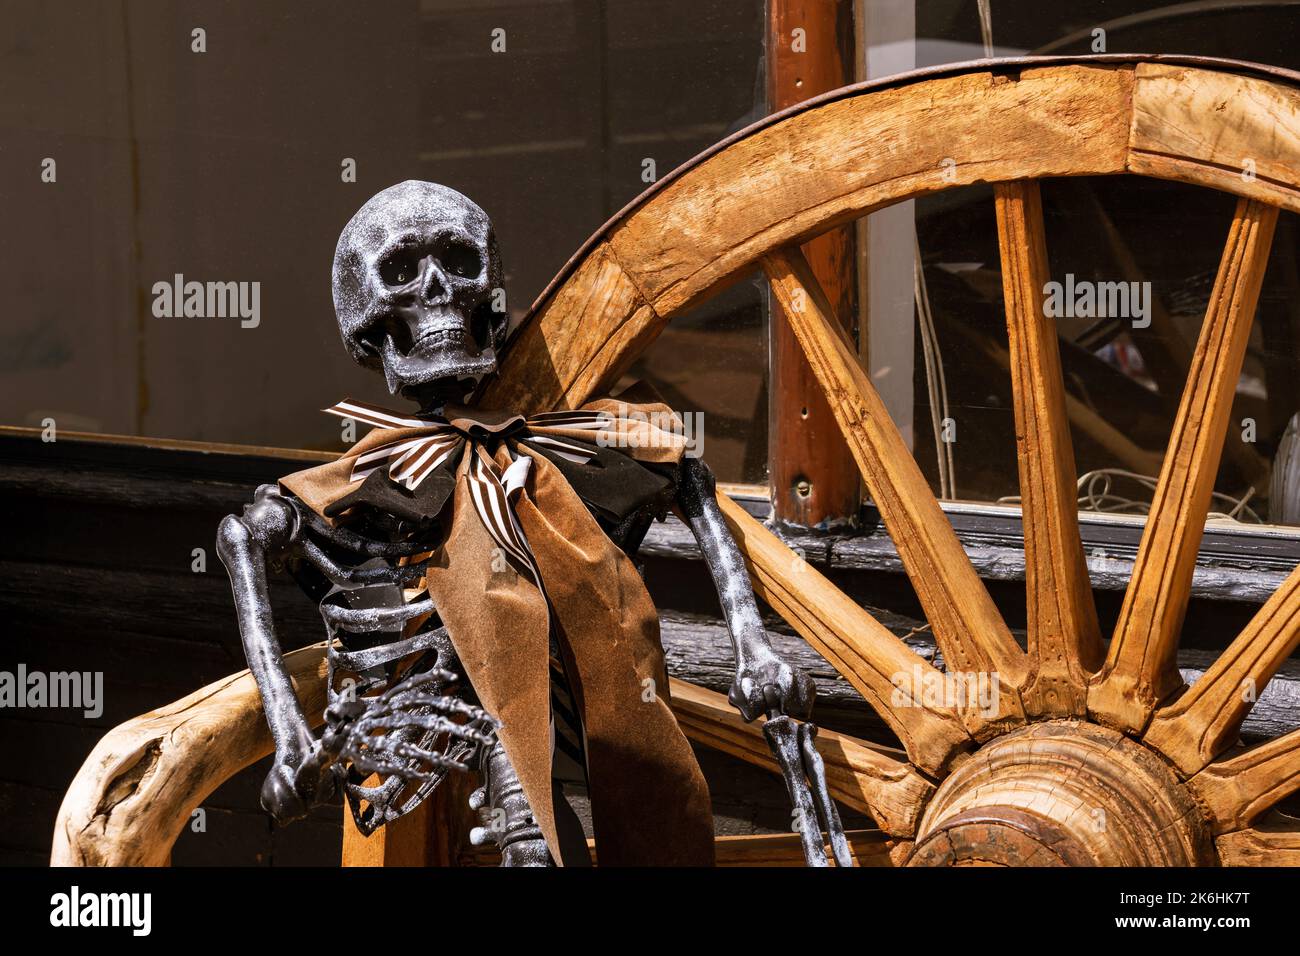 skeleton wearing a large bow around the neck sitting on a wagon wheel bench outdoors Stock Photo